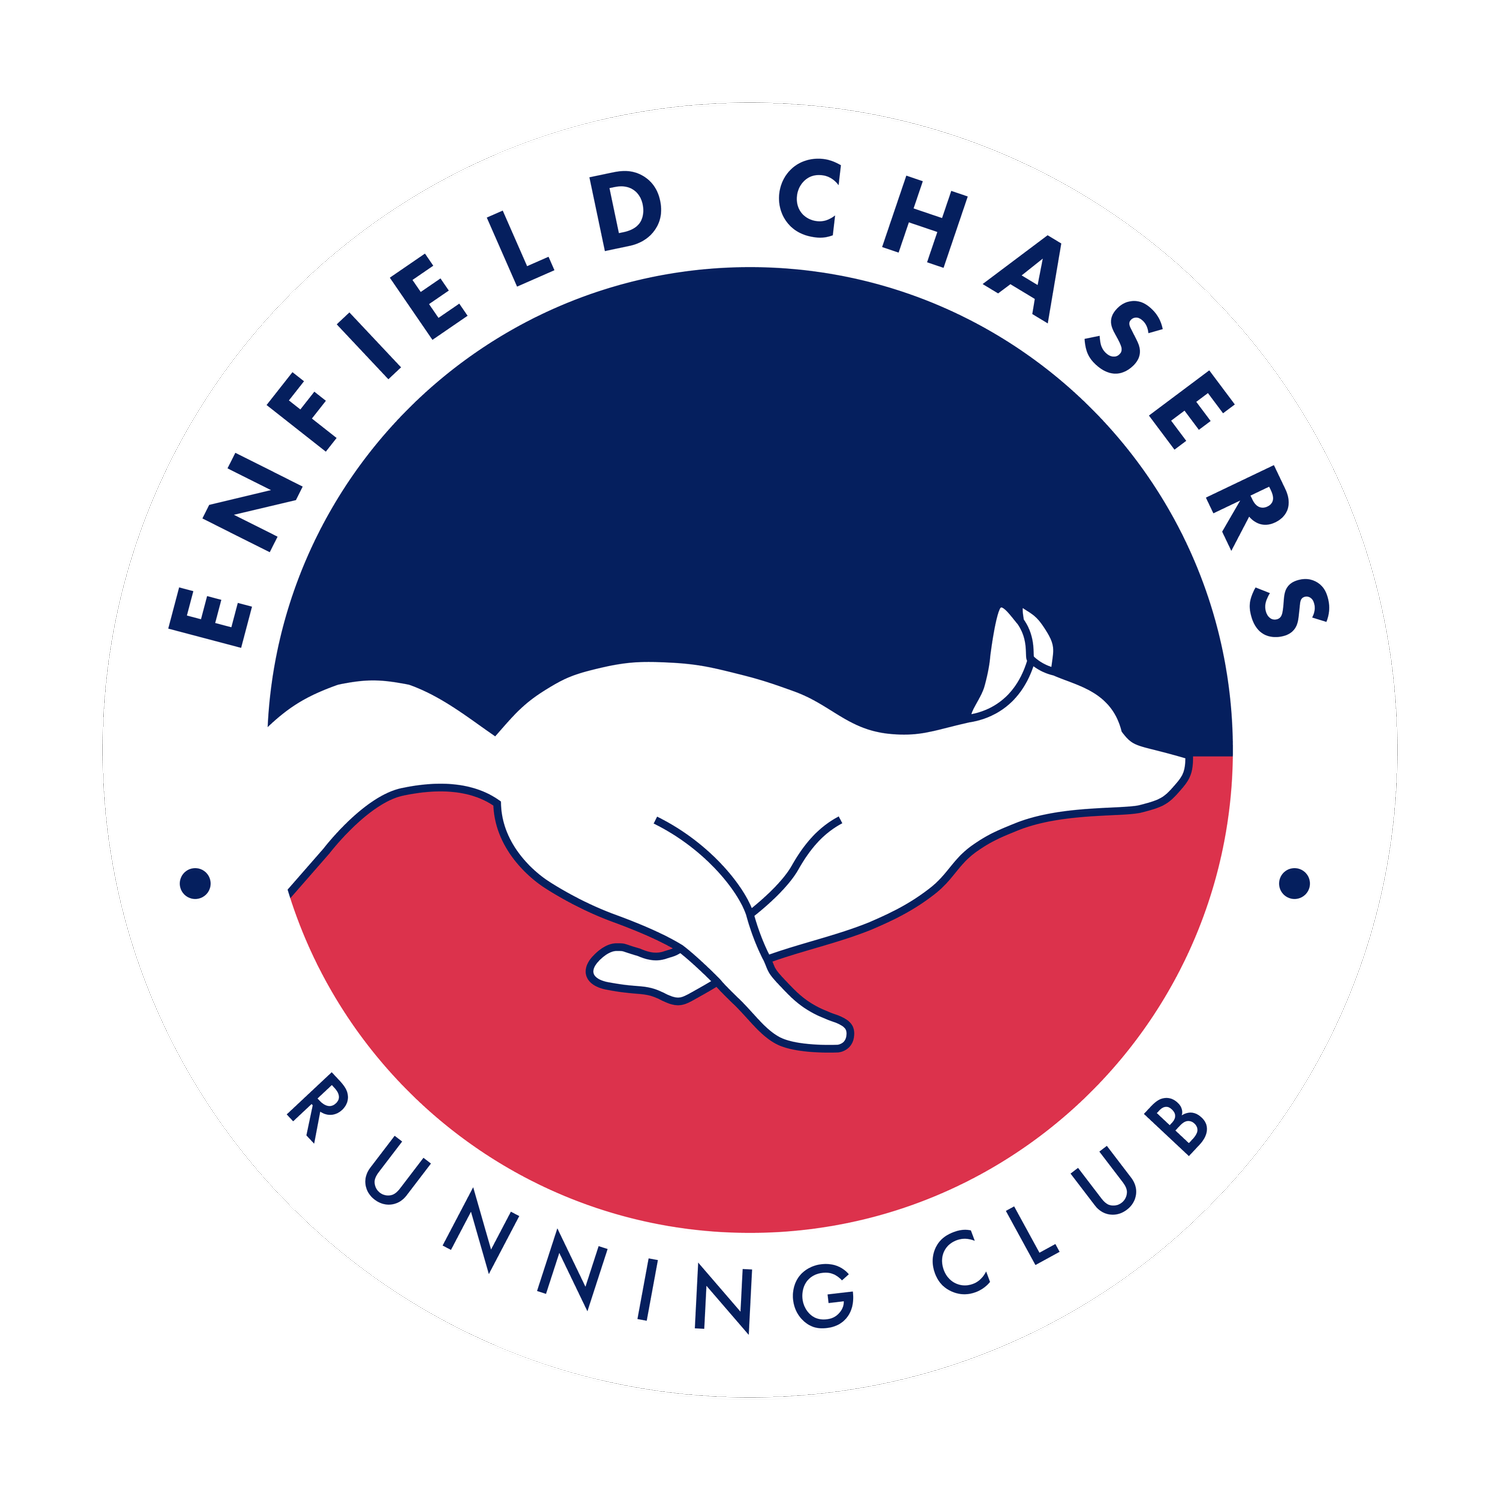 Enfield Chasers Running Club